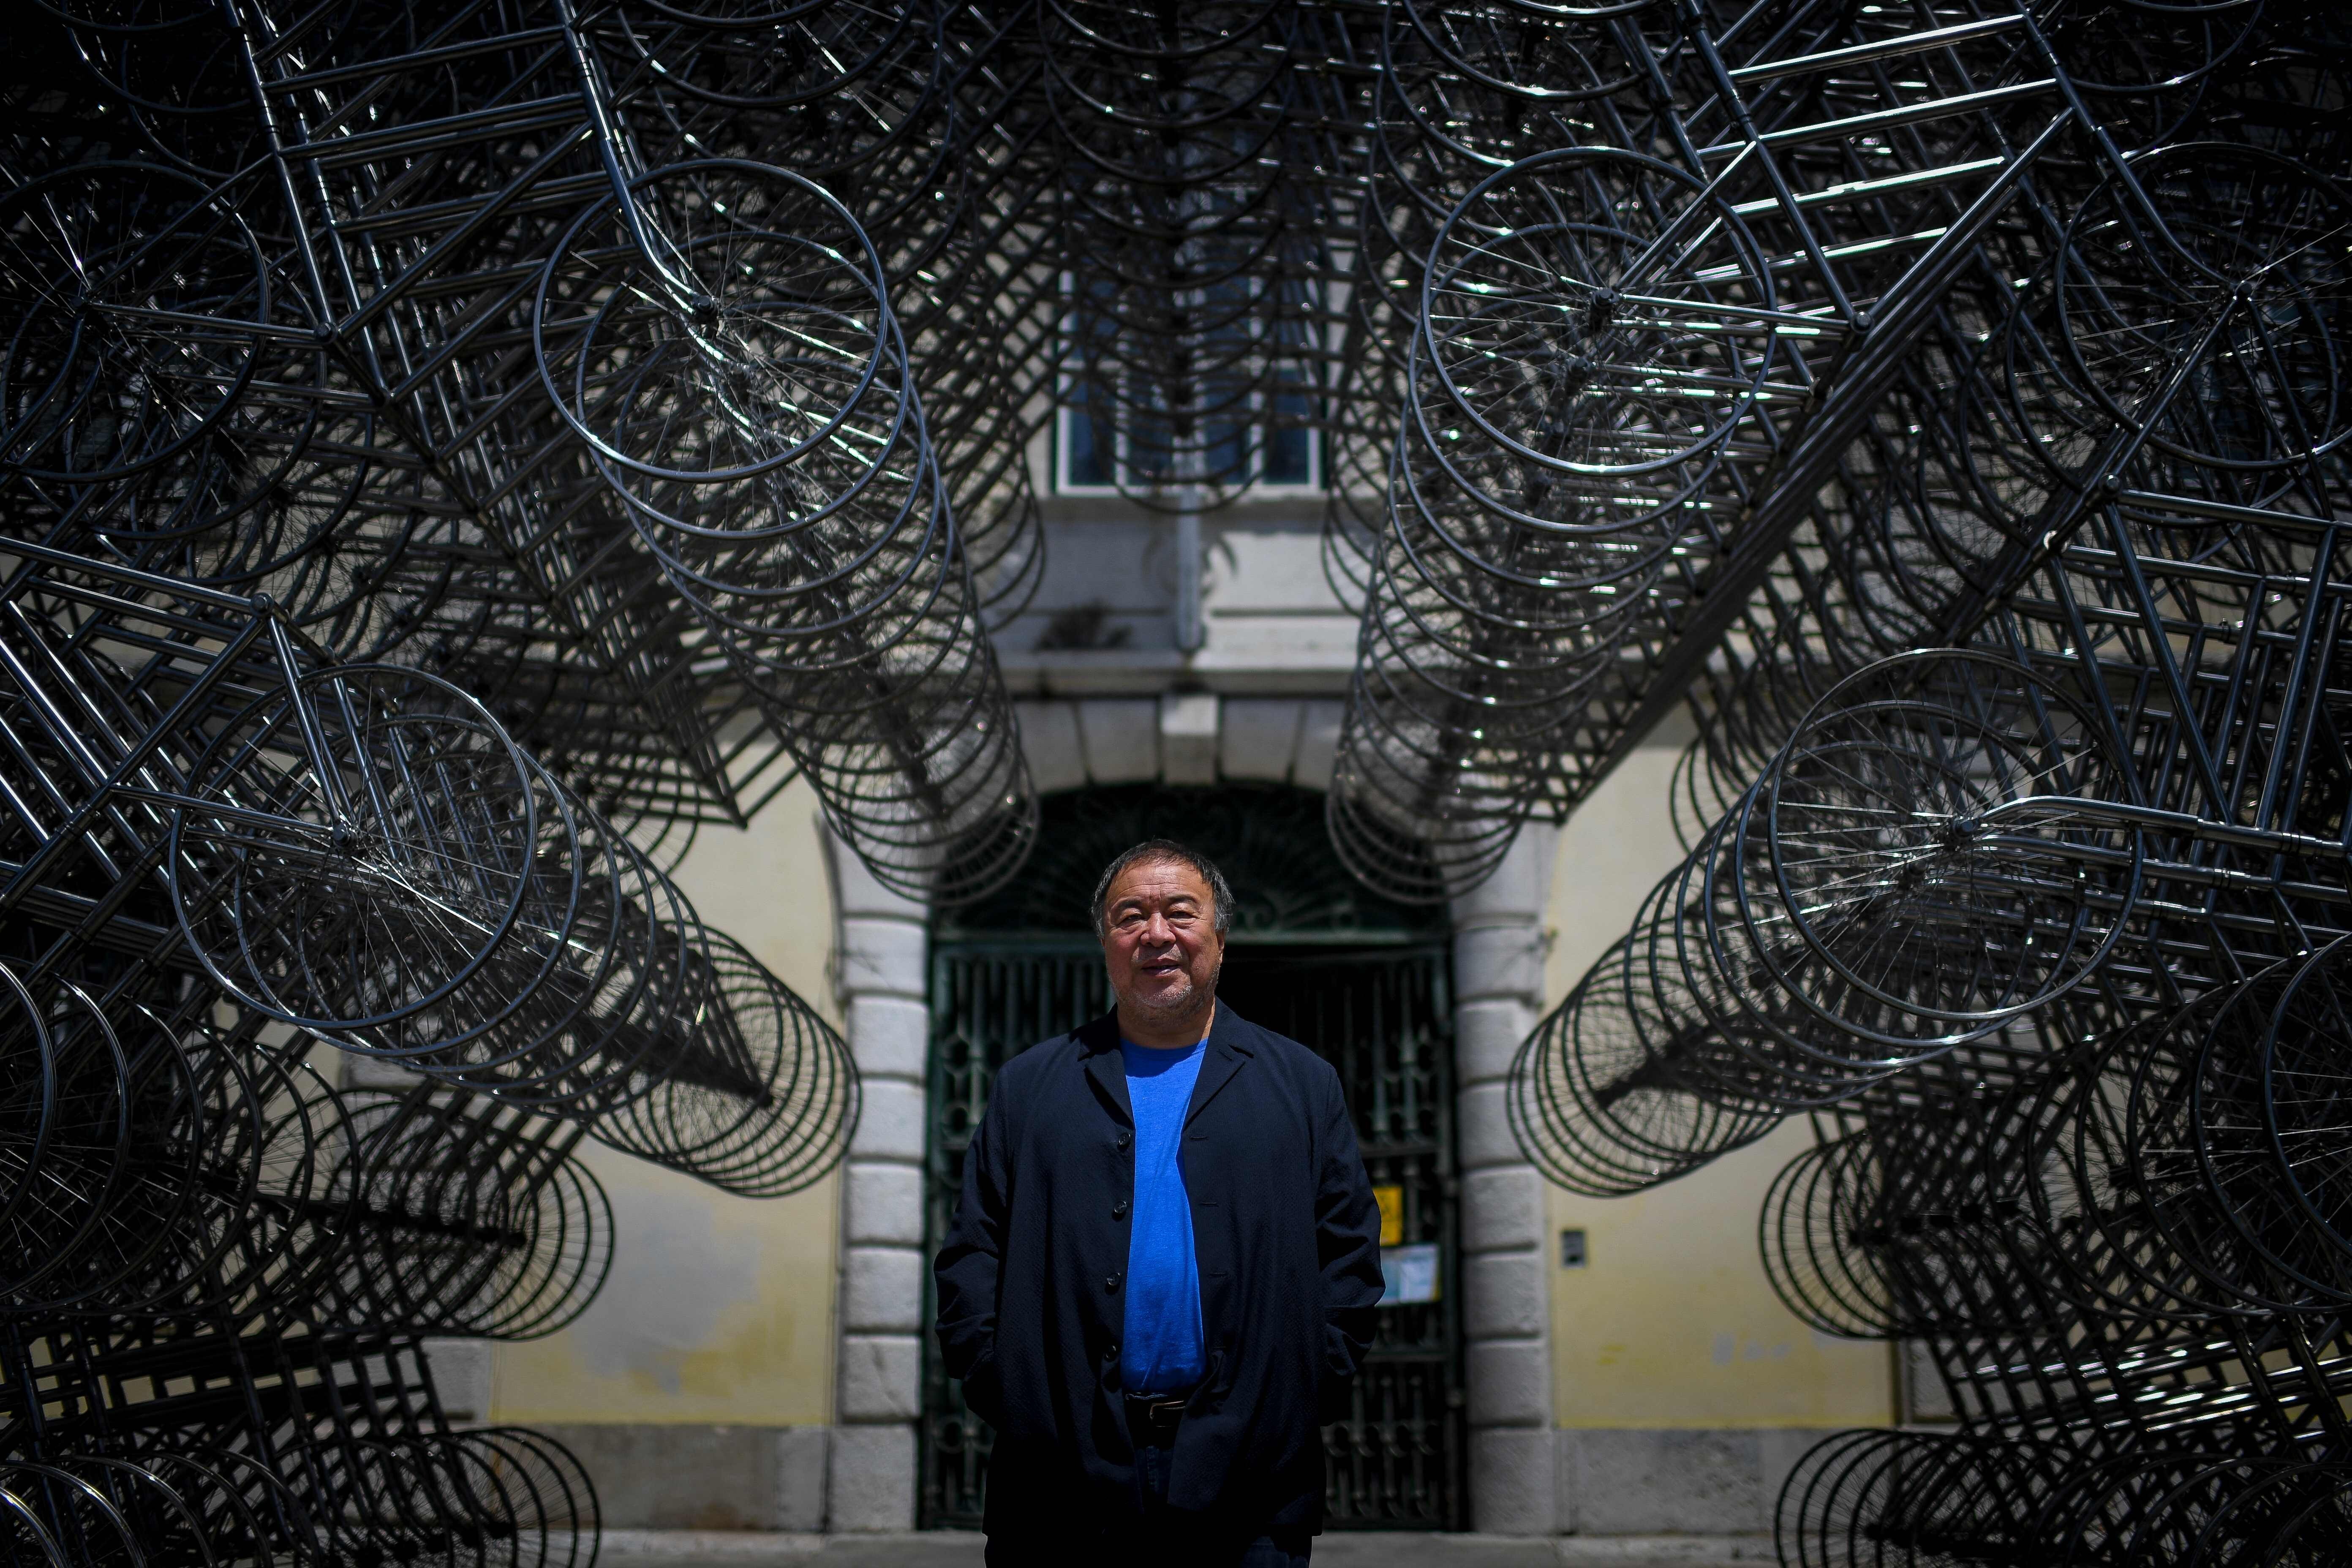 Chinese artist Ai Weiwei poses at his exhibition “Rapture” at the Cordoaria Nacional exhibition centre in Lisbon on Thursday. Photo: AFP